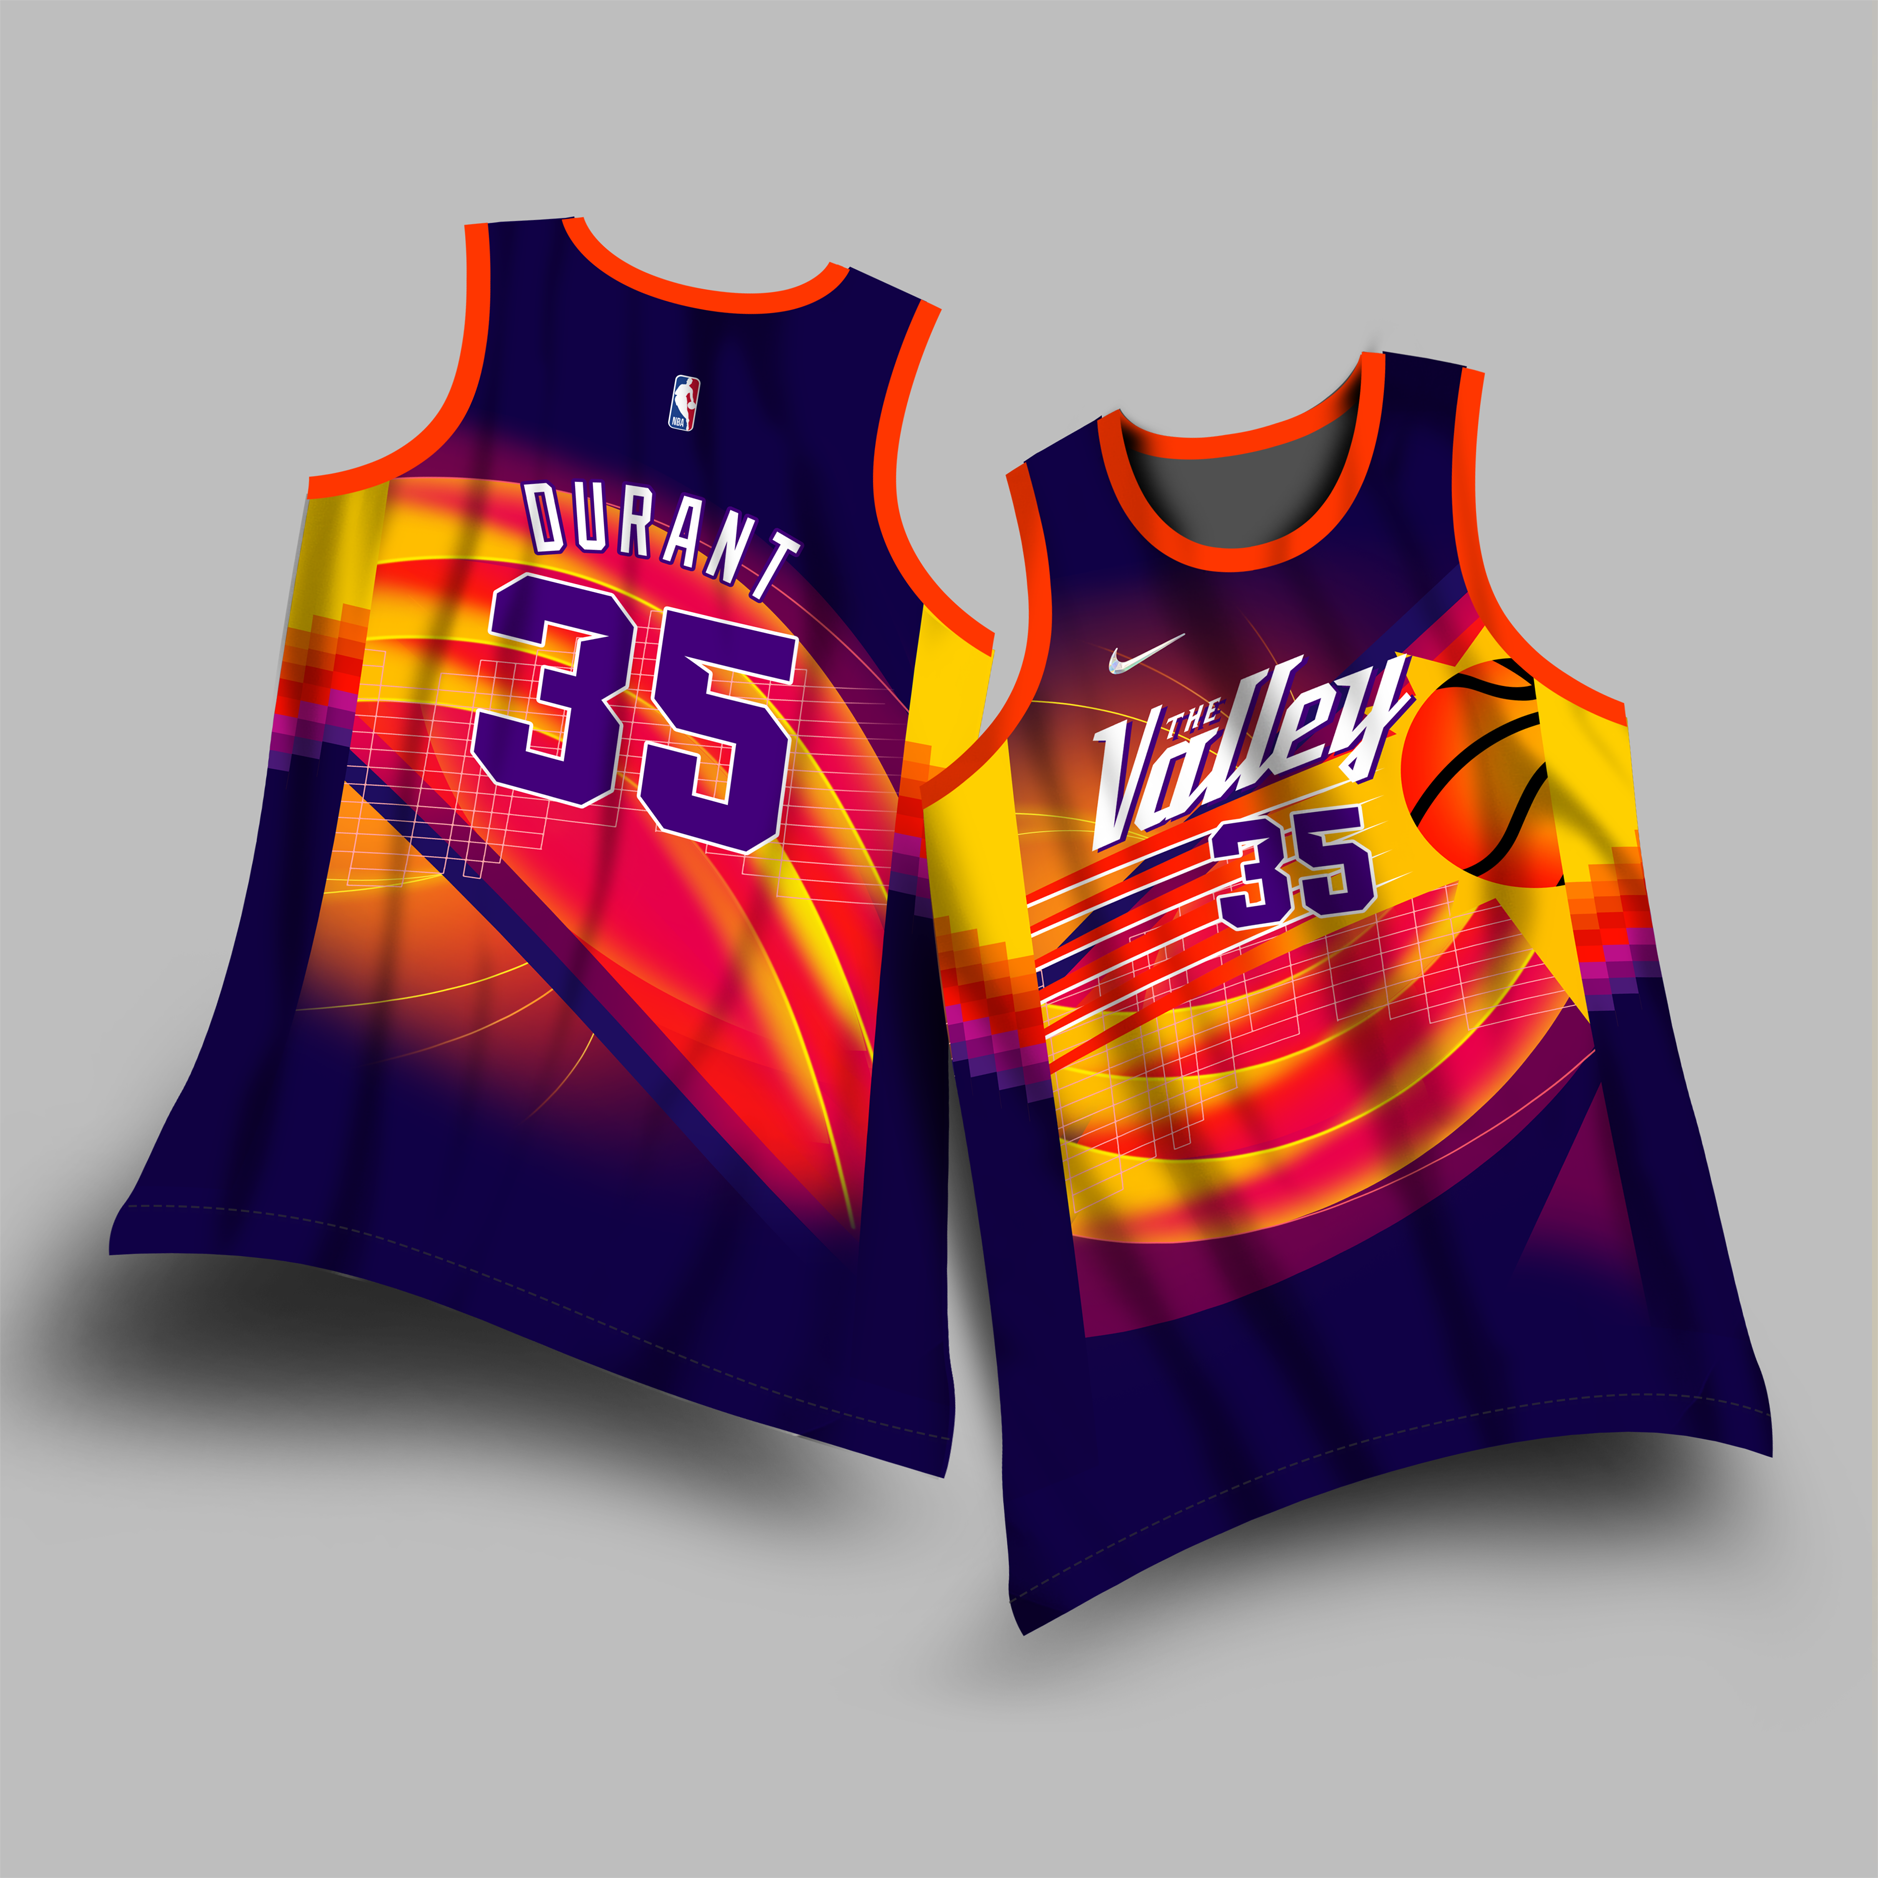 Kevin Durant Phoenix Suns City Edition The Valley Jersey